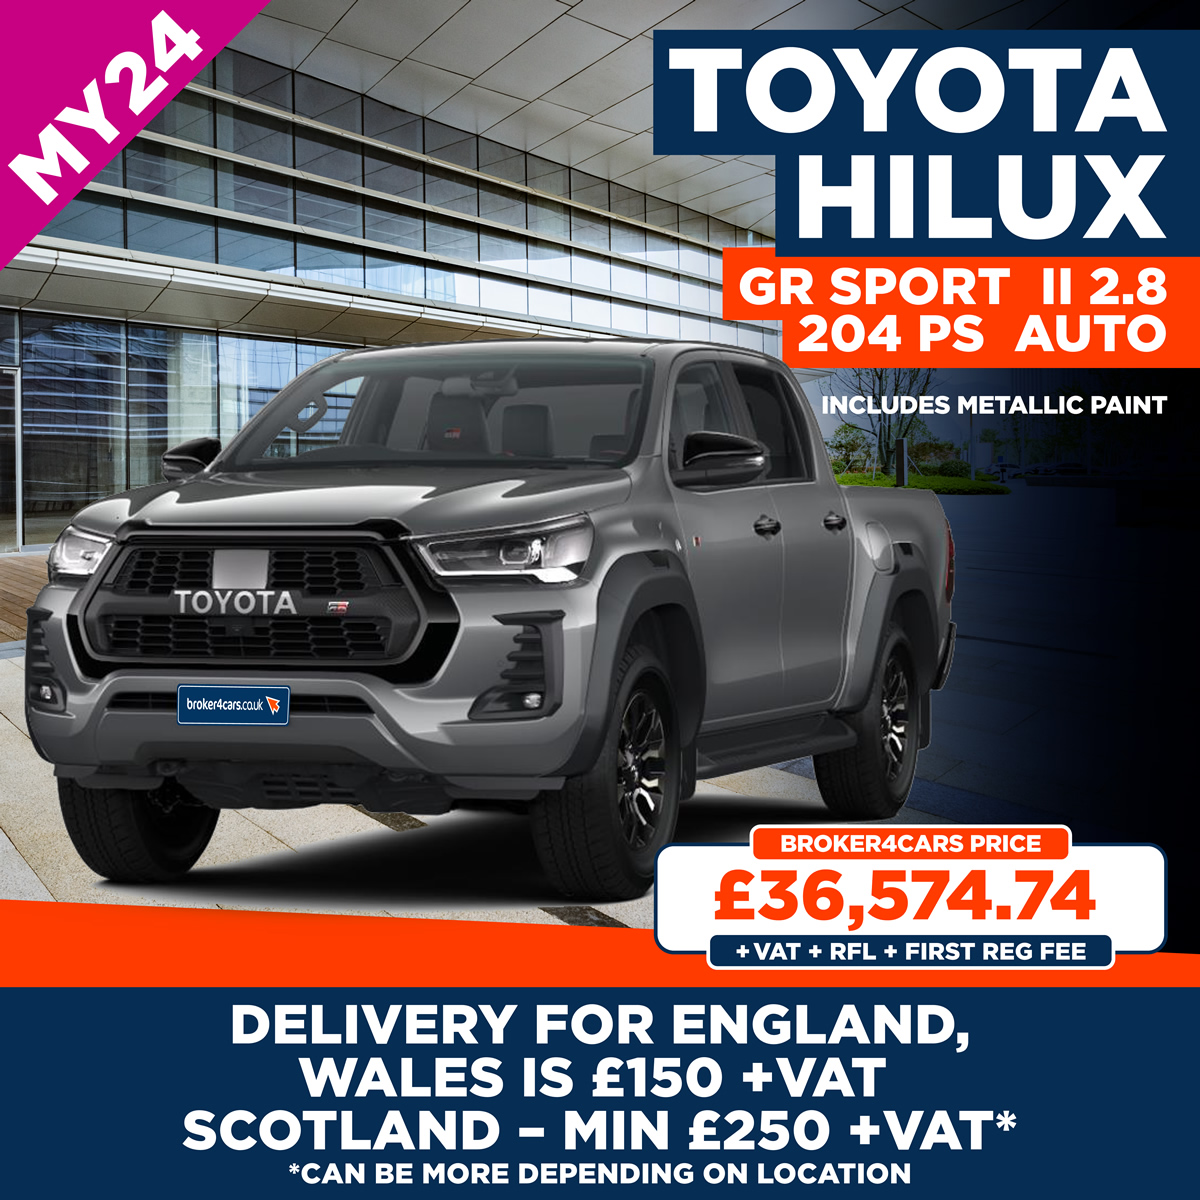 New MY24 Toyota Hilux GR Sport II 2.8 204 PS Auto includes metallic paint. Delivery for England and Wales is £150- plus VAT. Scotland – Min £250 plus VAT, but can be more depending on location. £36,574.74 +VAT + RFL £335+ First Reg Fee £55